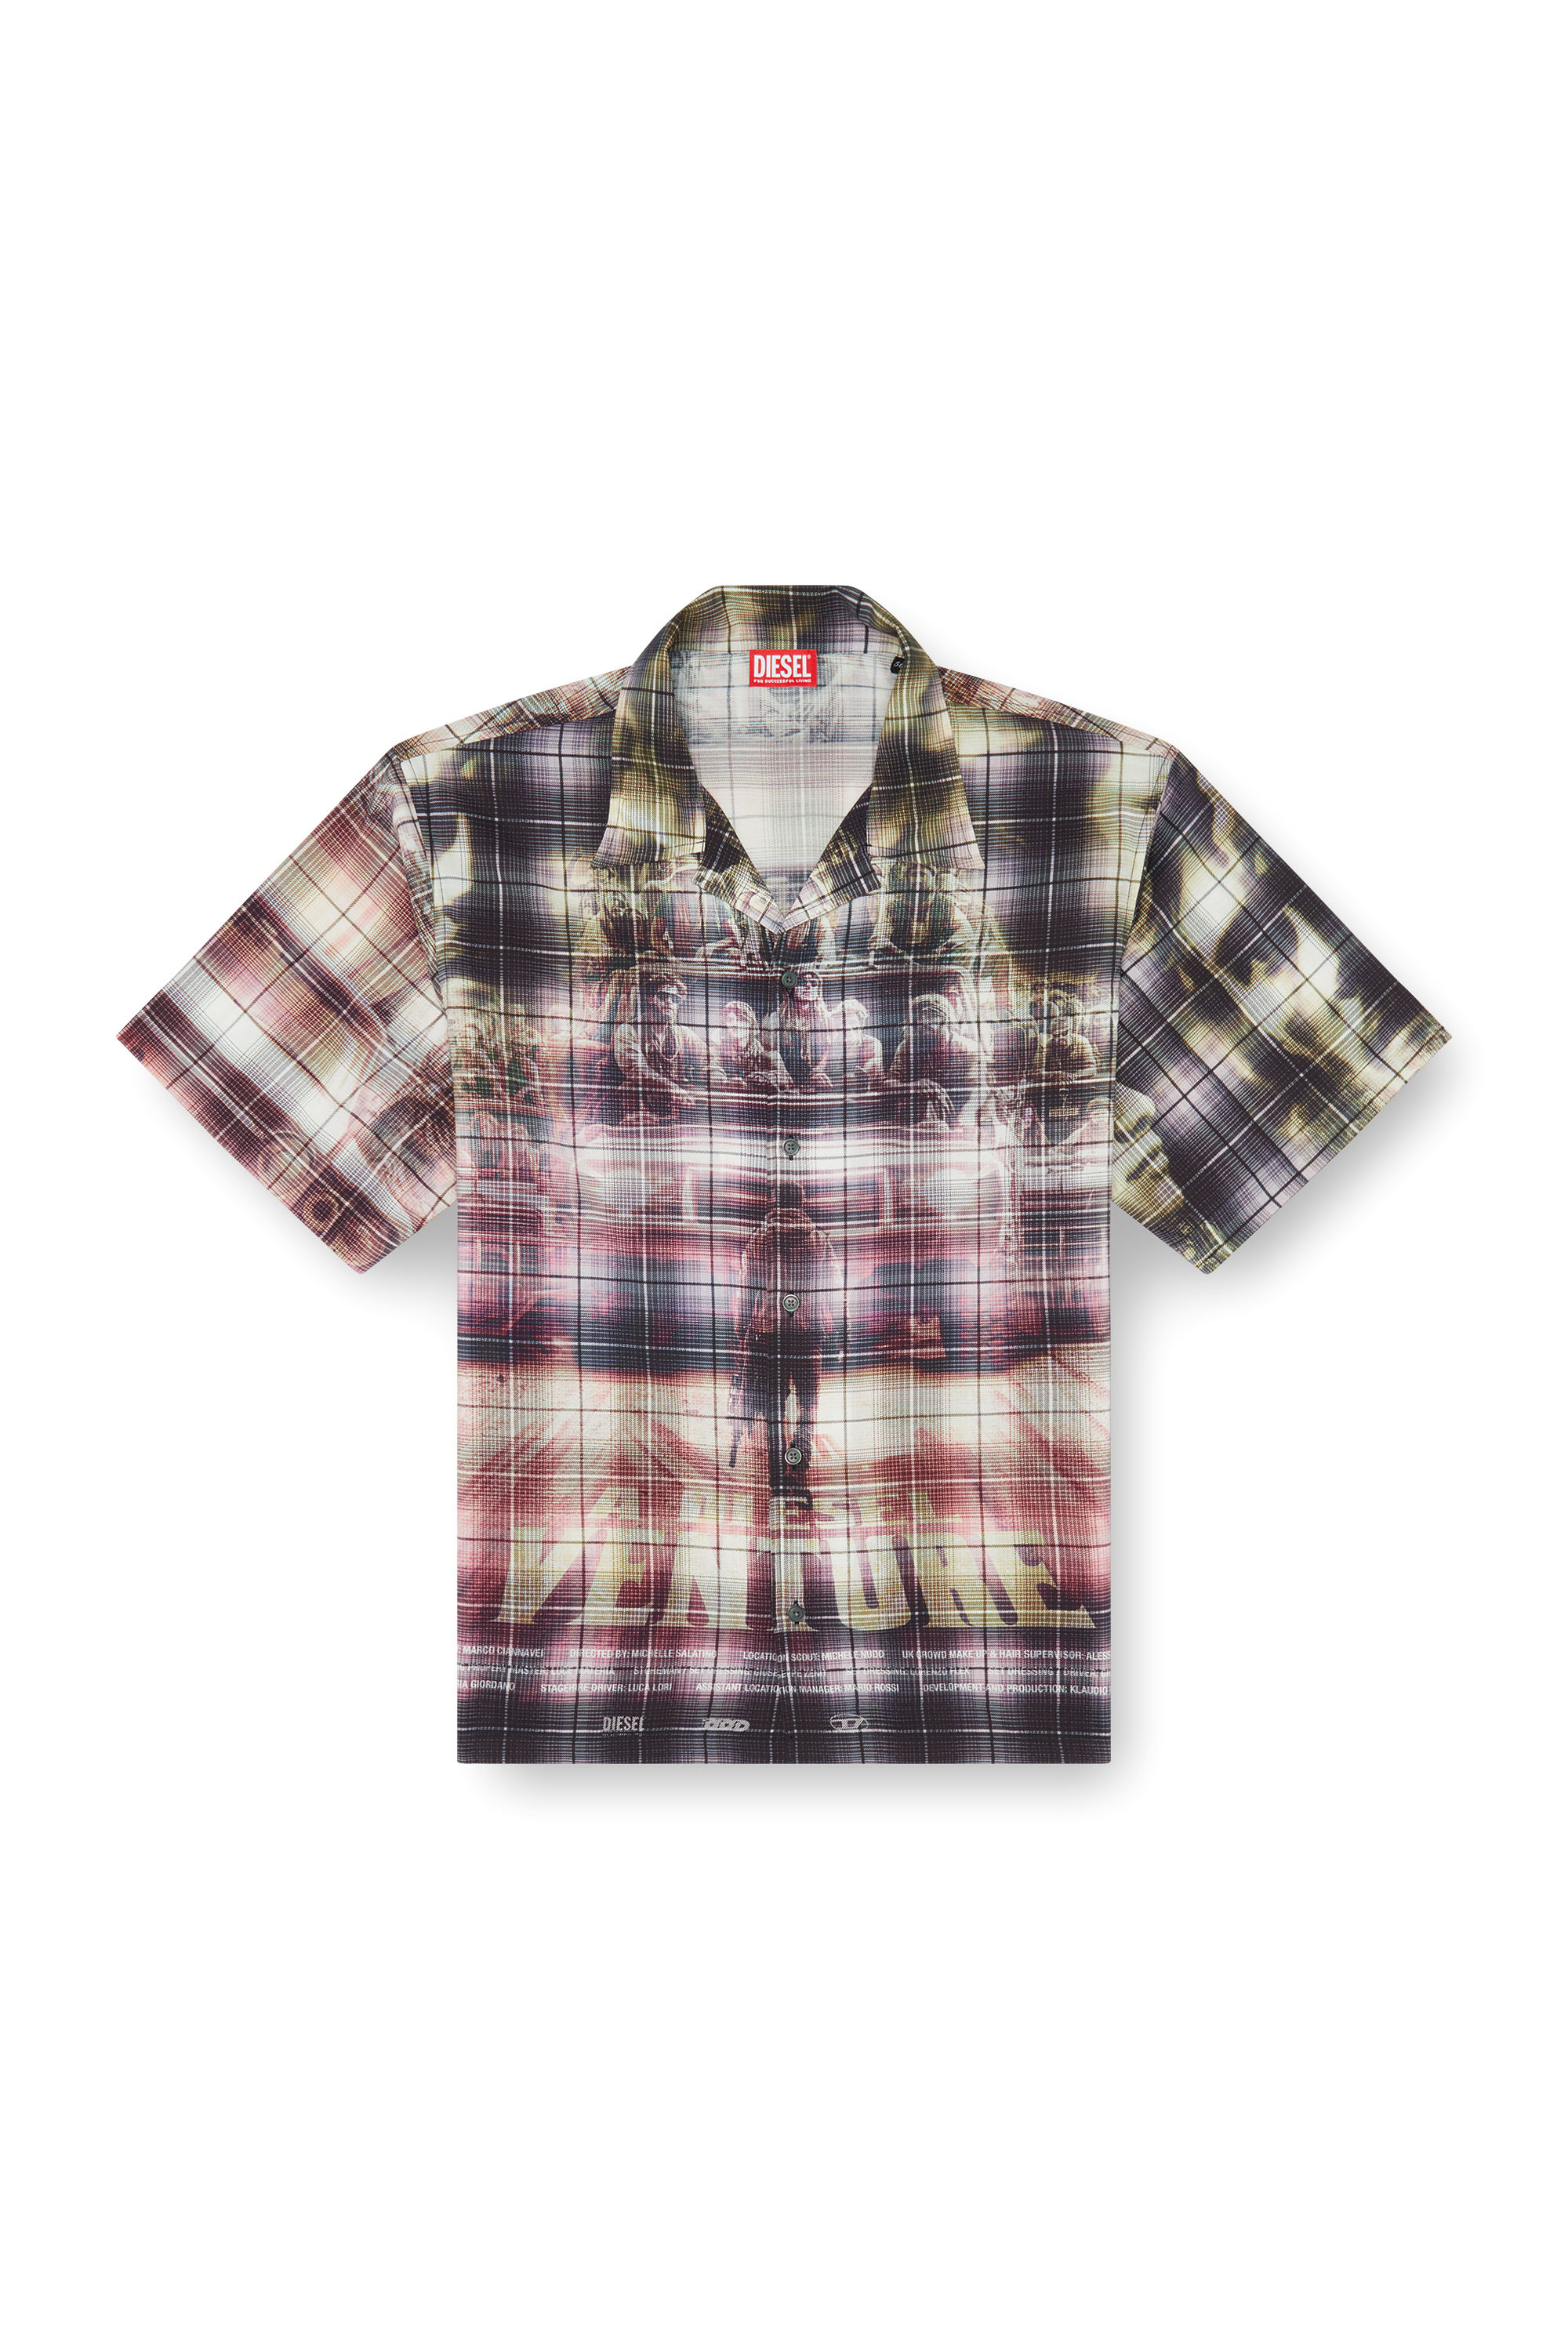 Diesel - S-TILBORG, Man Short-sleeve check shirt with poster print in Multicolor - Image 3